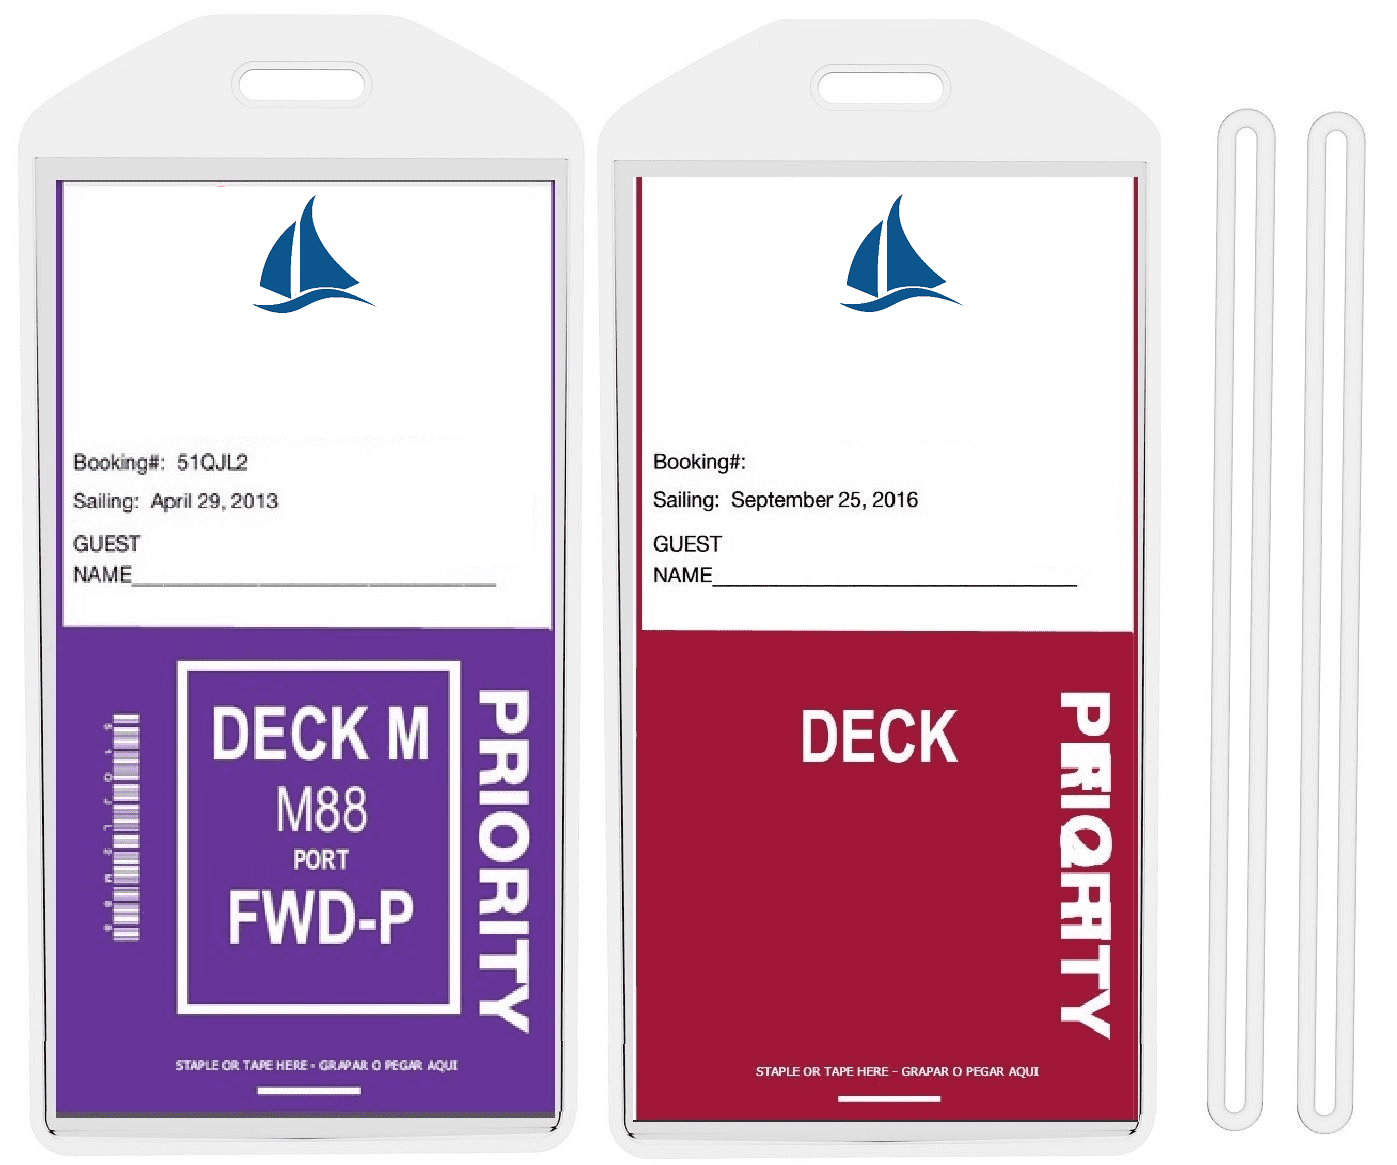 Cardinals Bird Cruise Luggage Tag For Travel Tags Accessories 2 Pack Luggage Tags